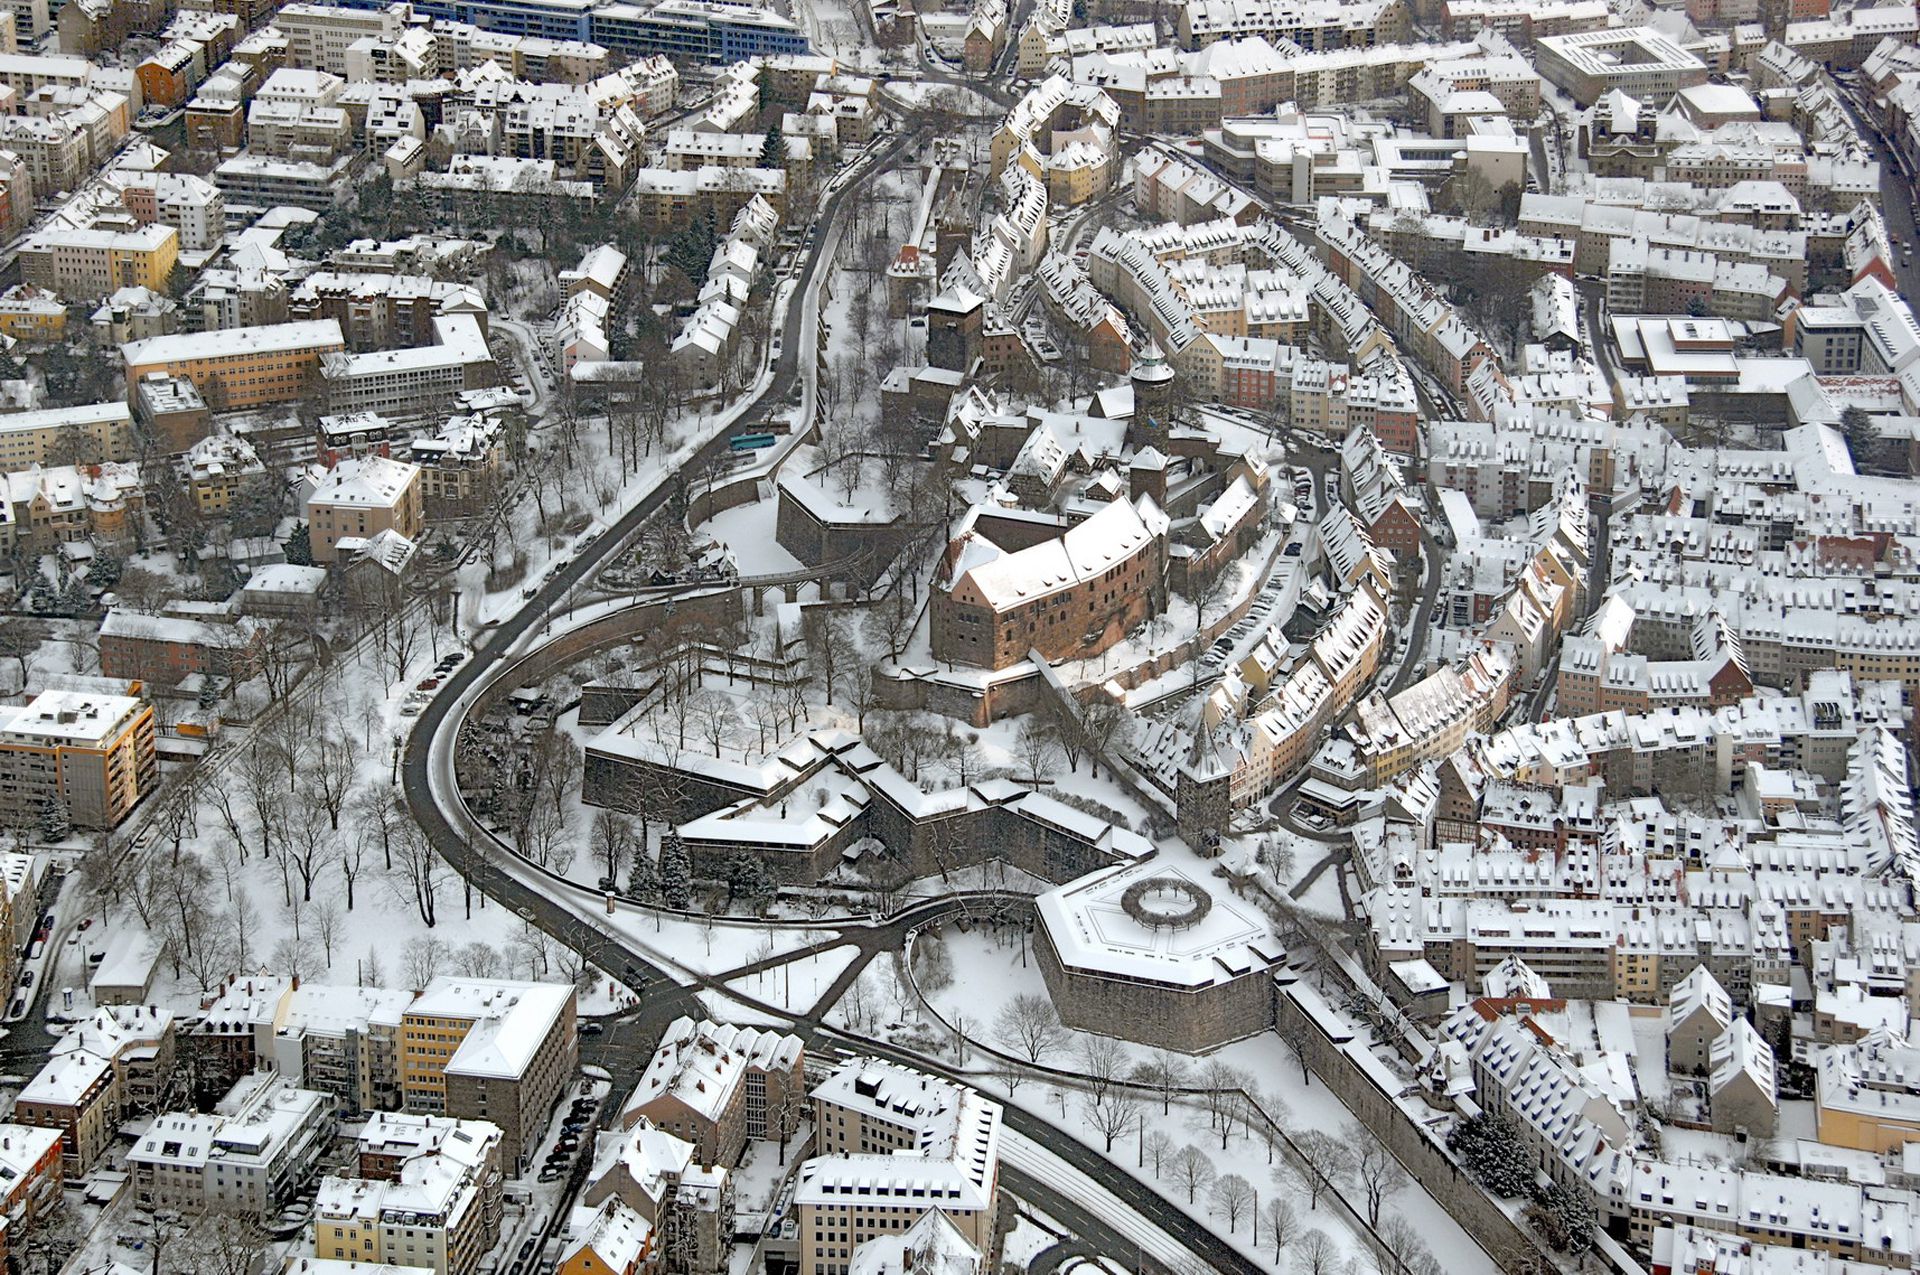 City Fortification Photo in winter, in the foreground Tiergärtnertor bastion